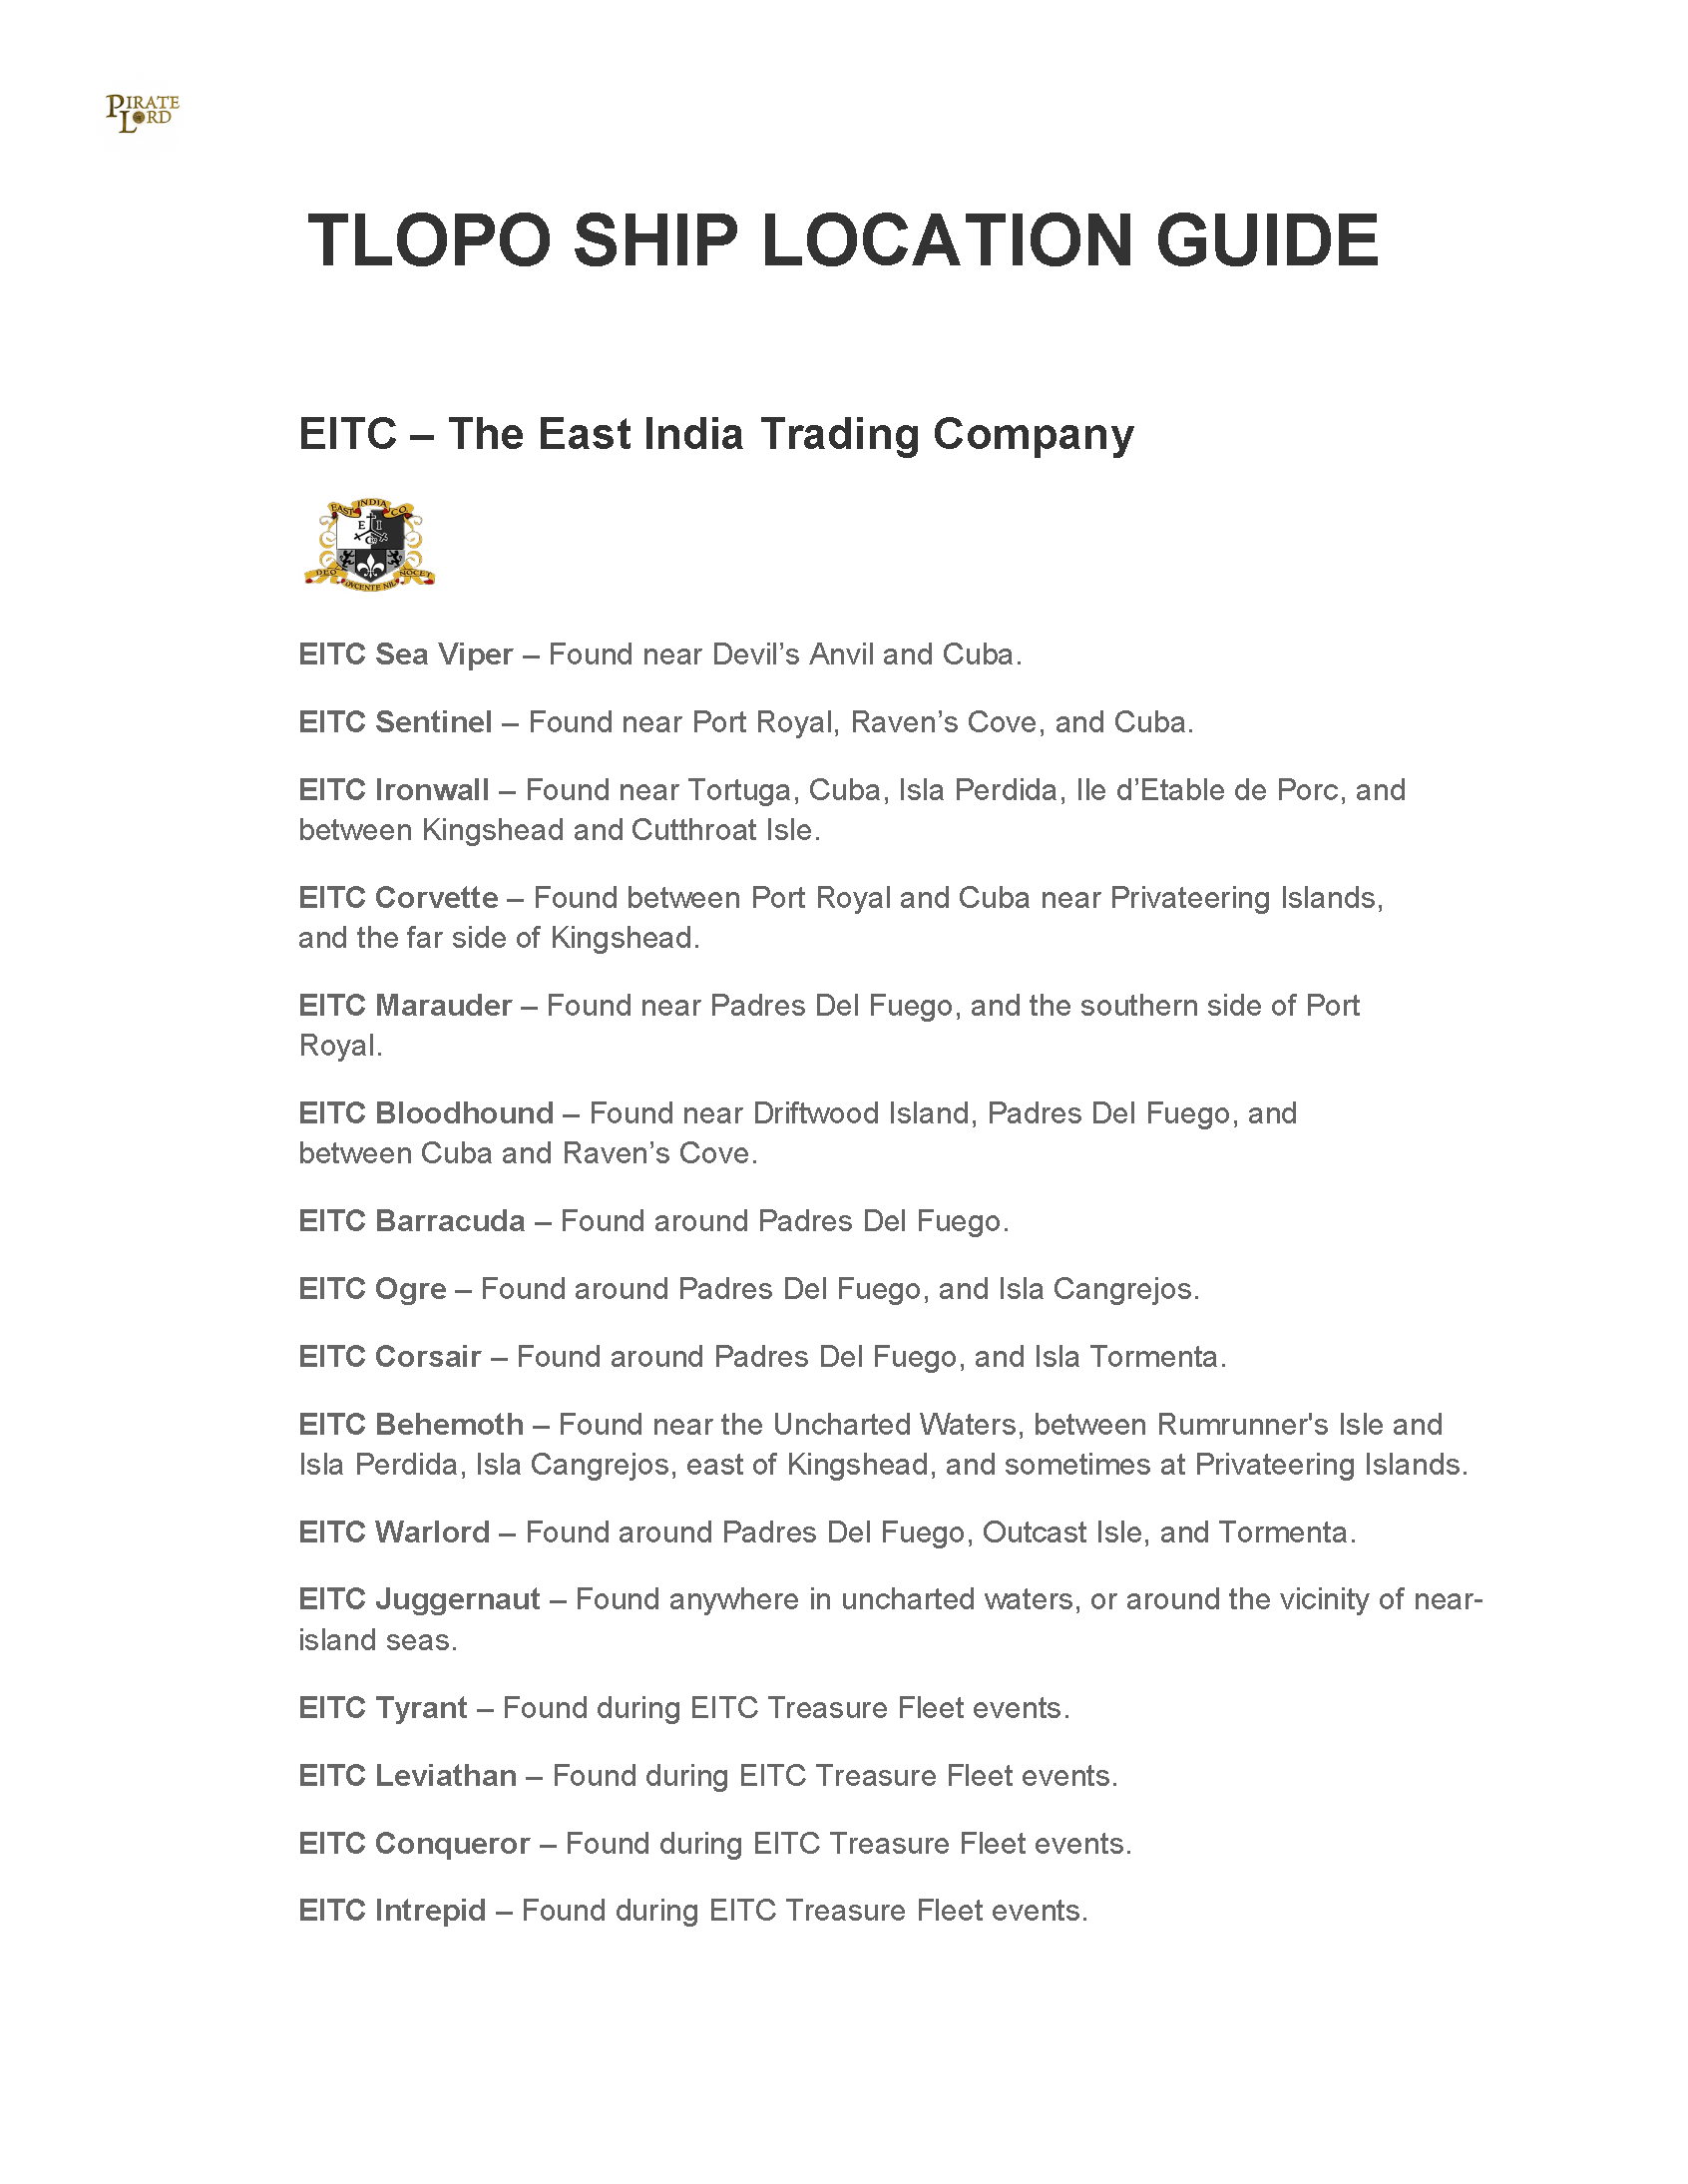 Enemy ship location guide_Page_2.png